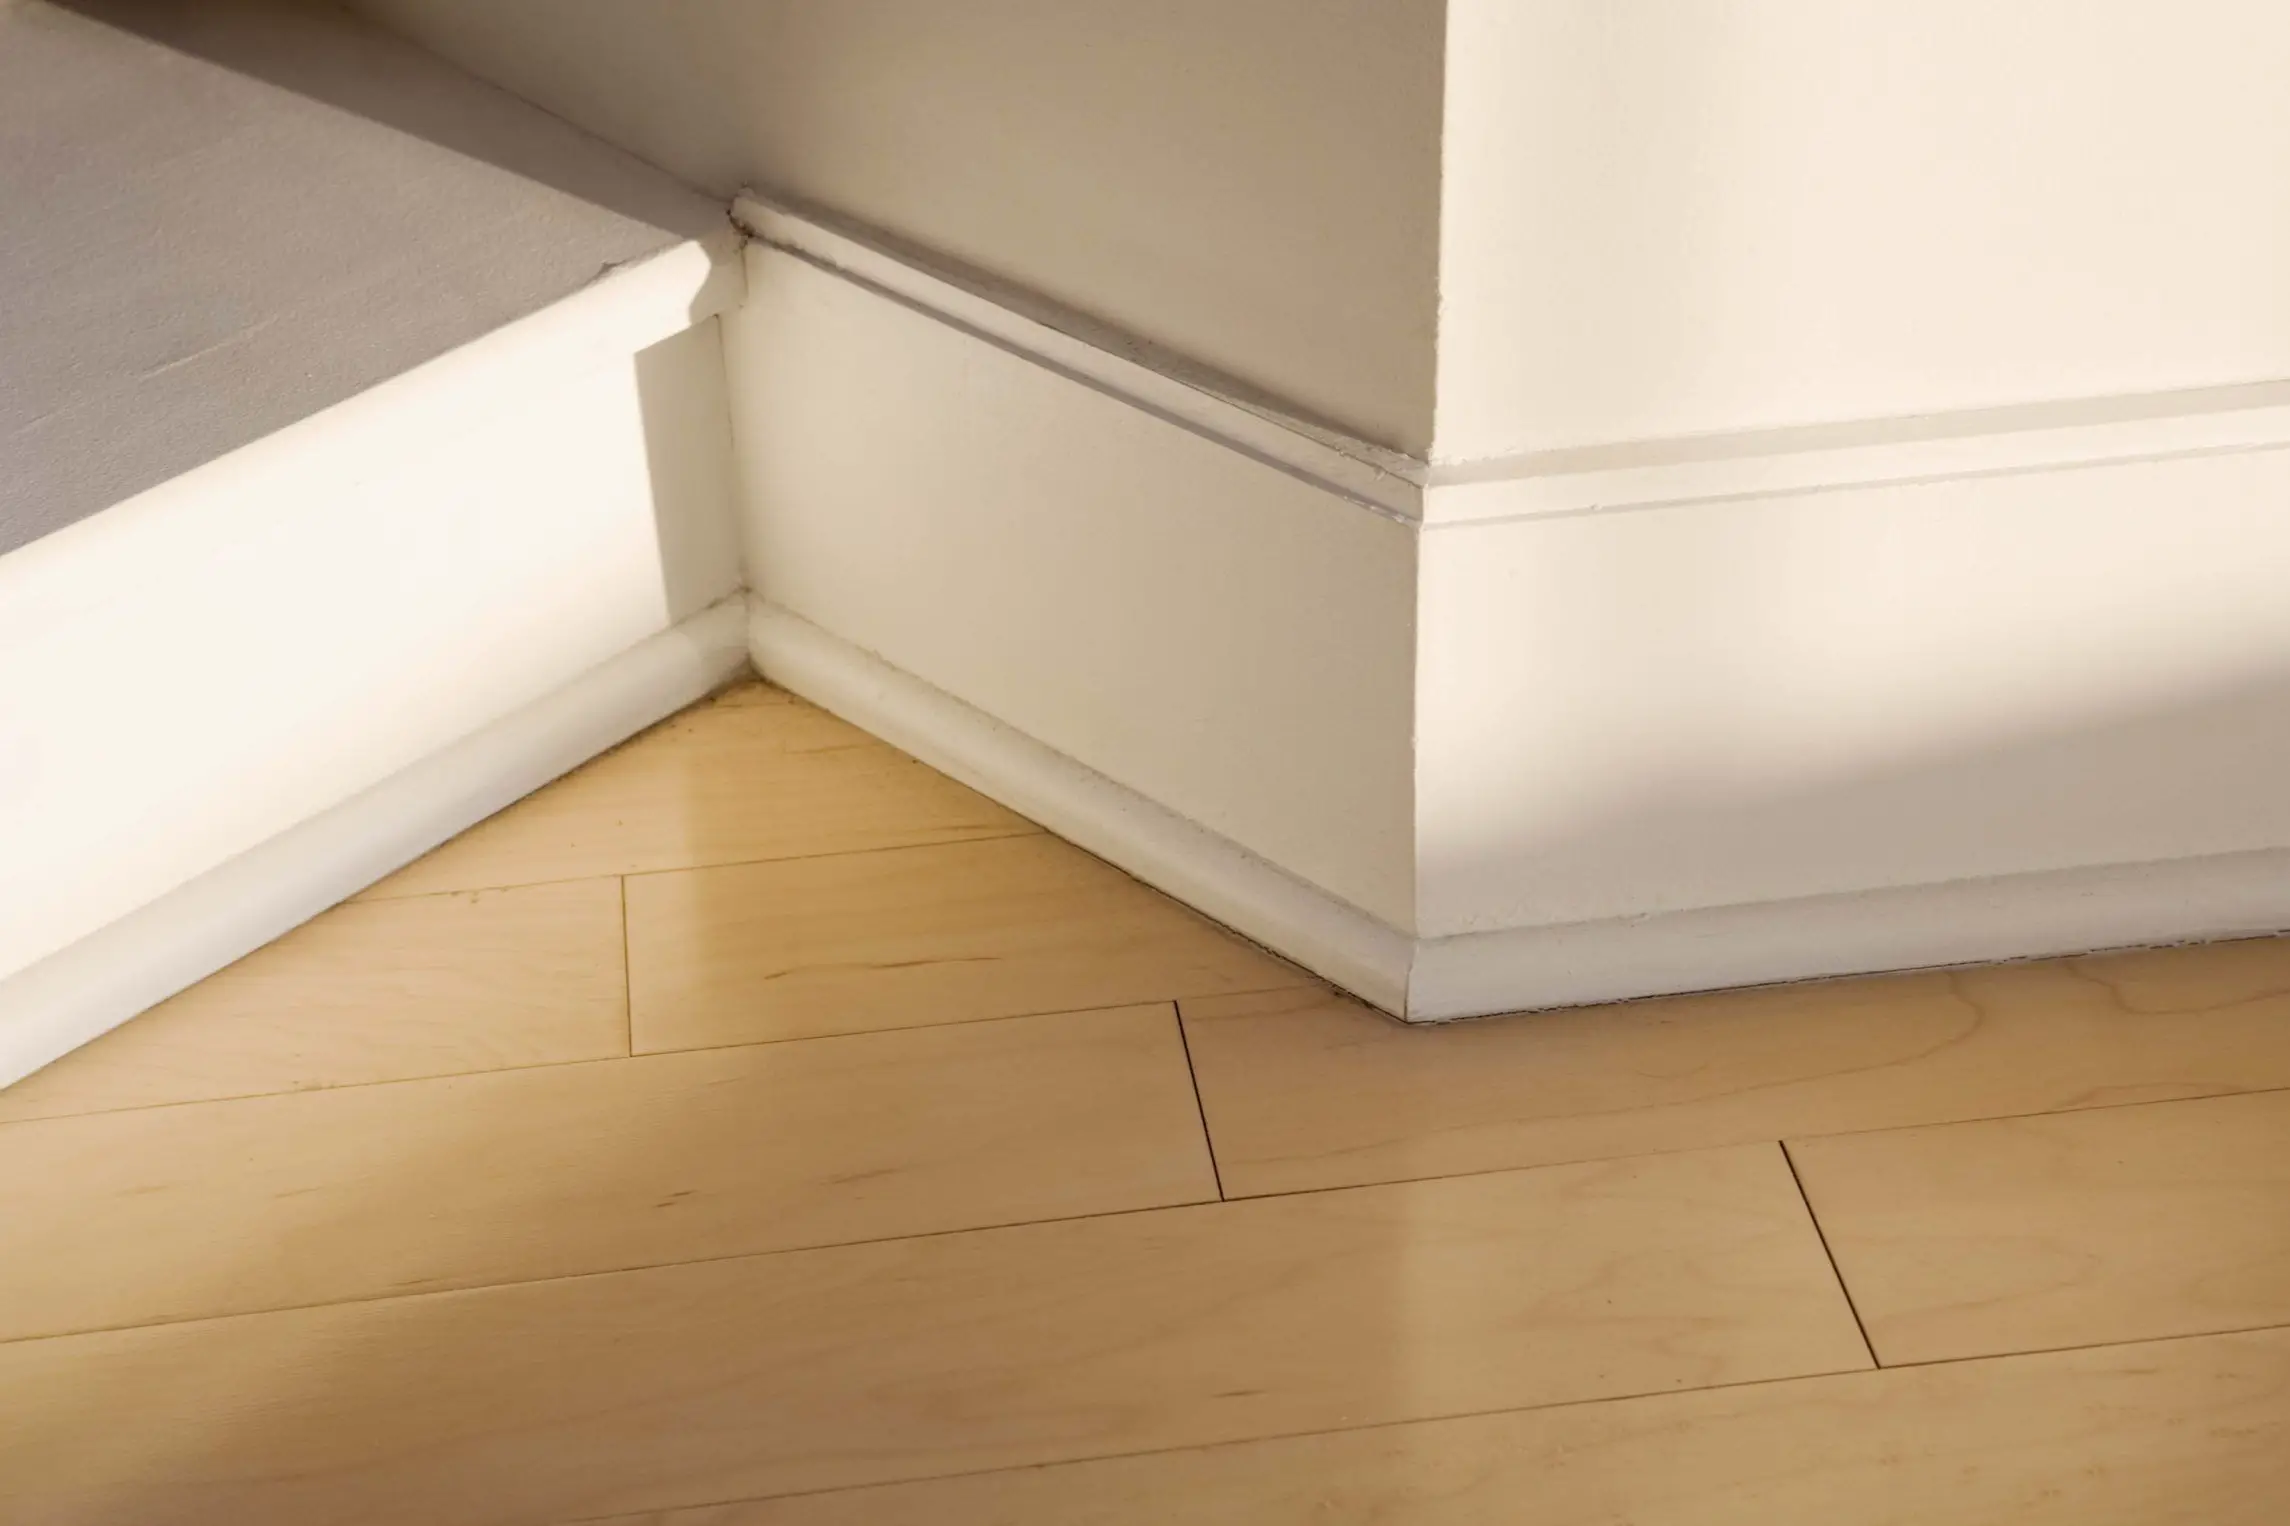 How To Remove Baseboard Without Damaging Wall